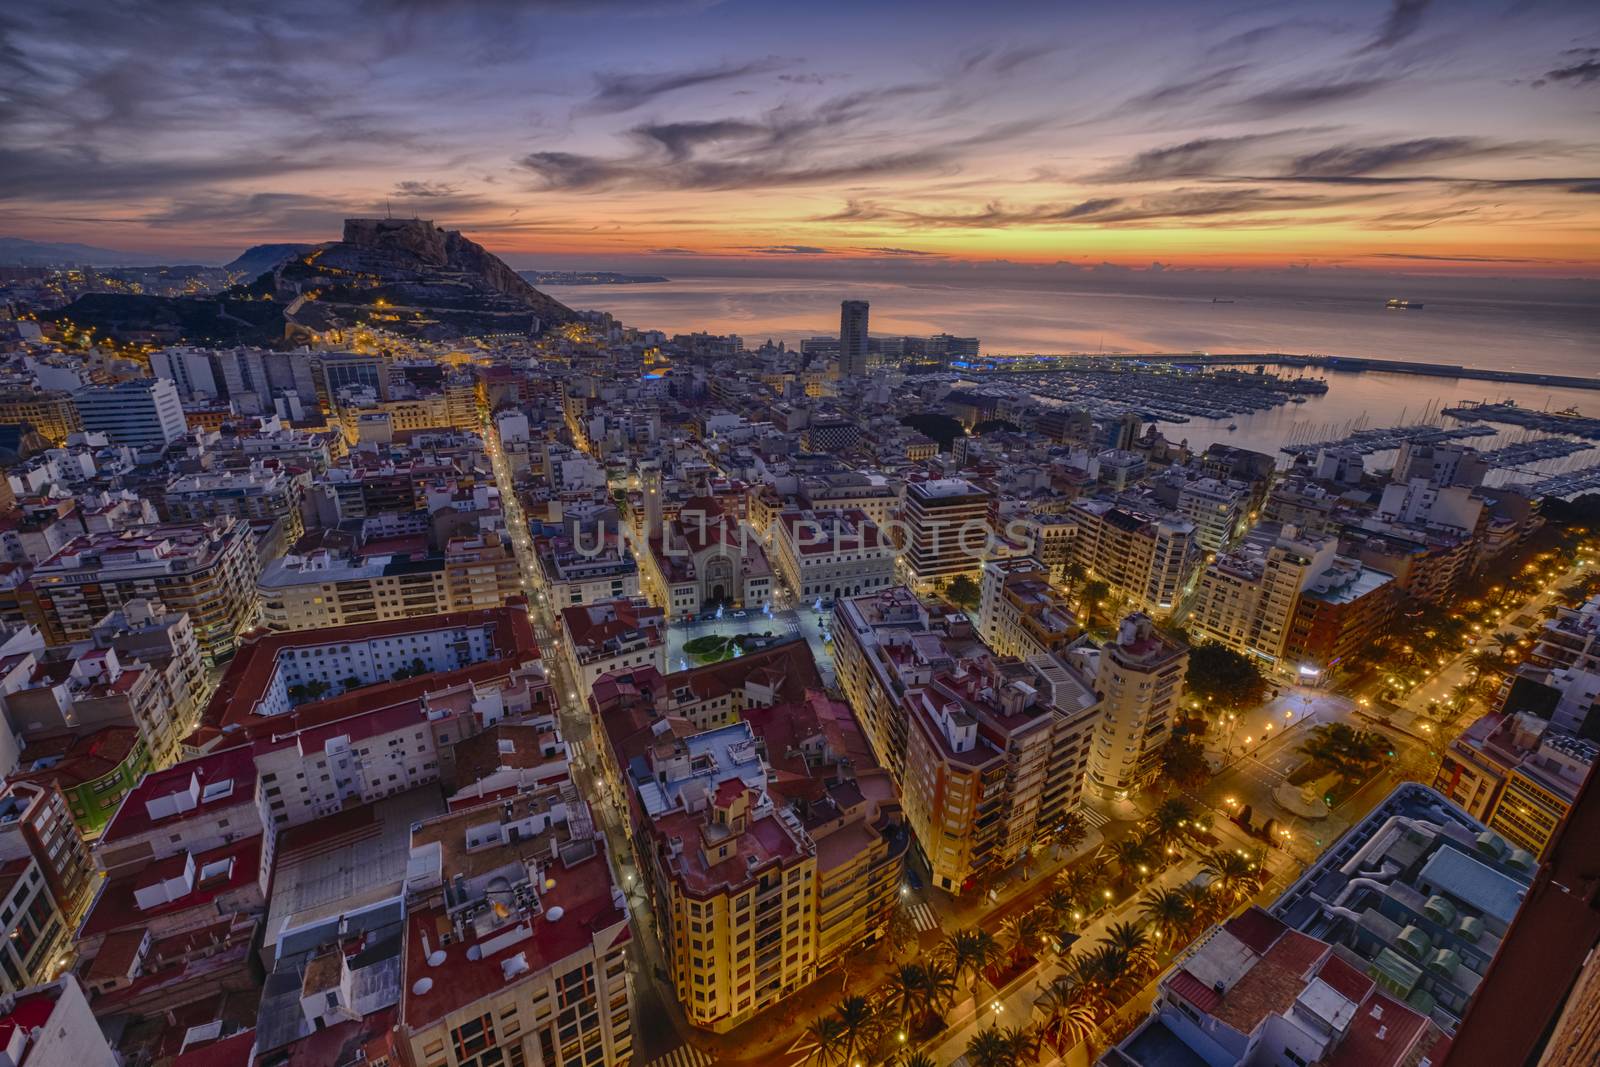 sunrise over the ancient city of Alicante in Spain by itsajoop